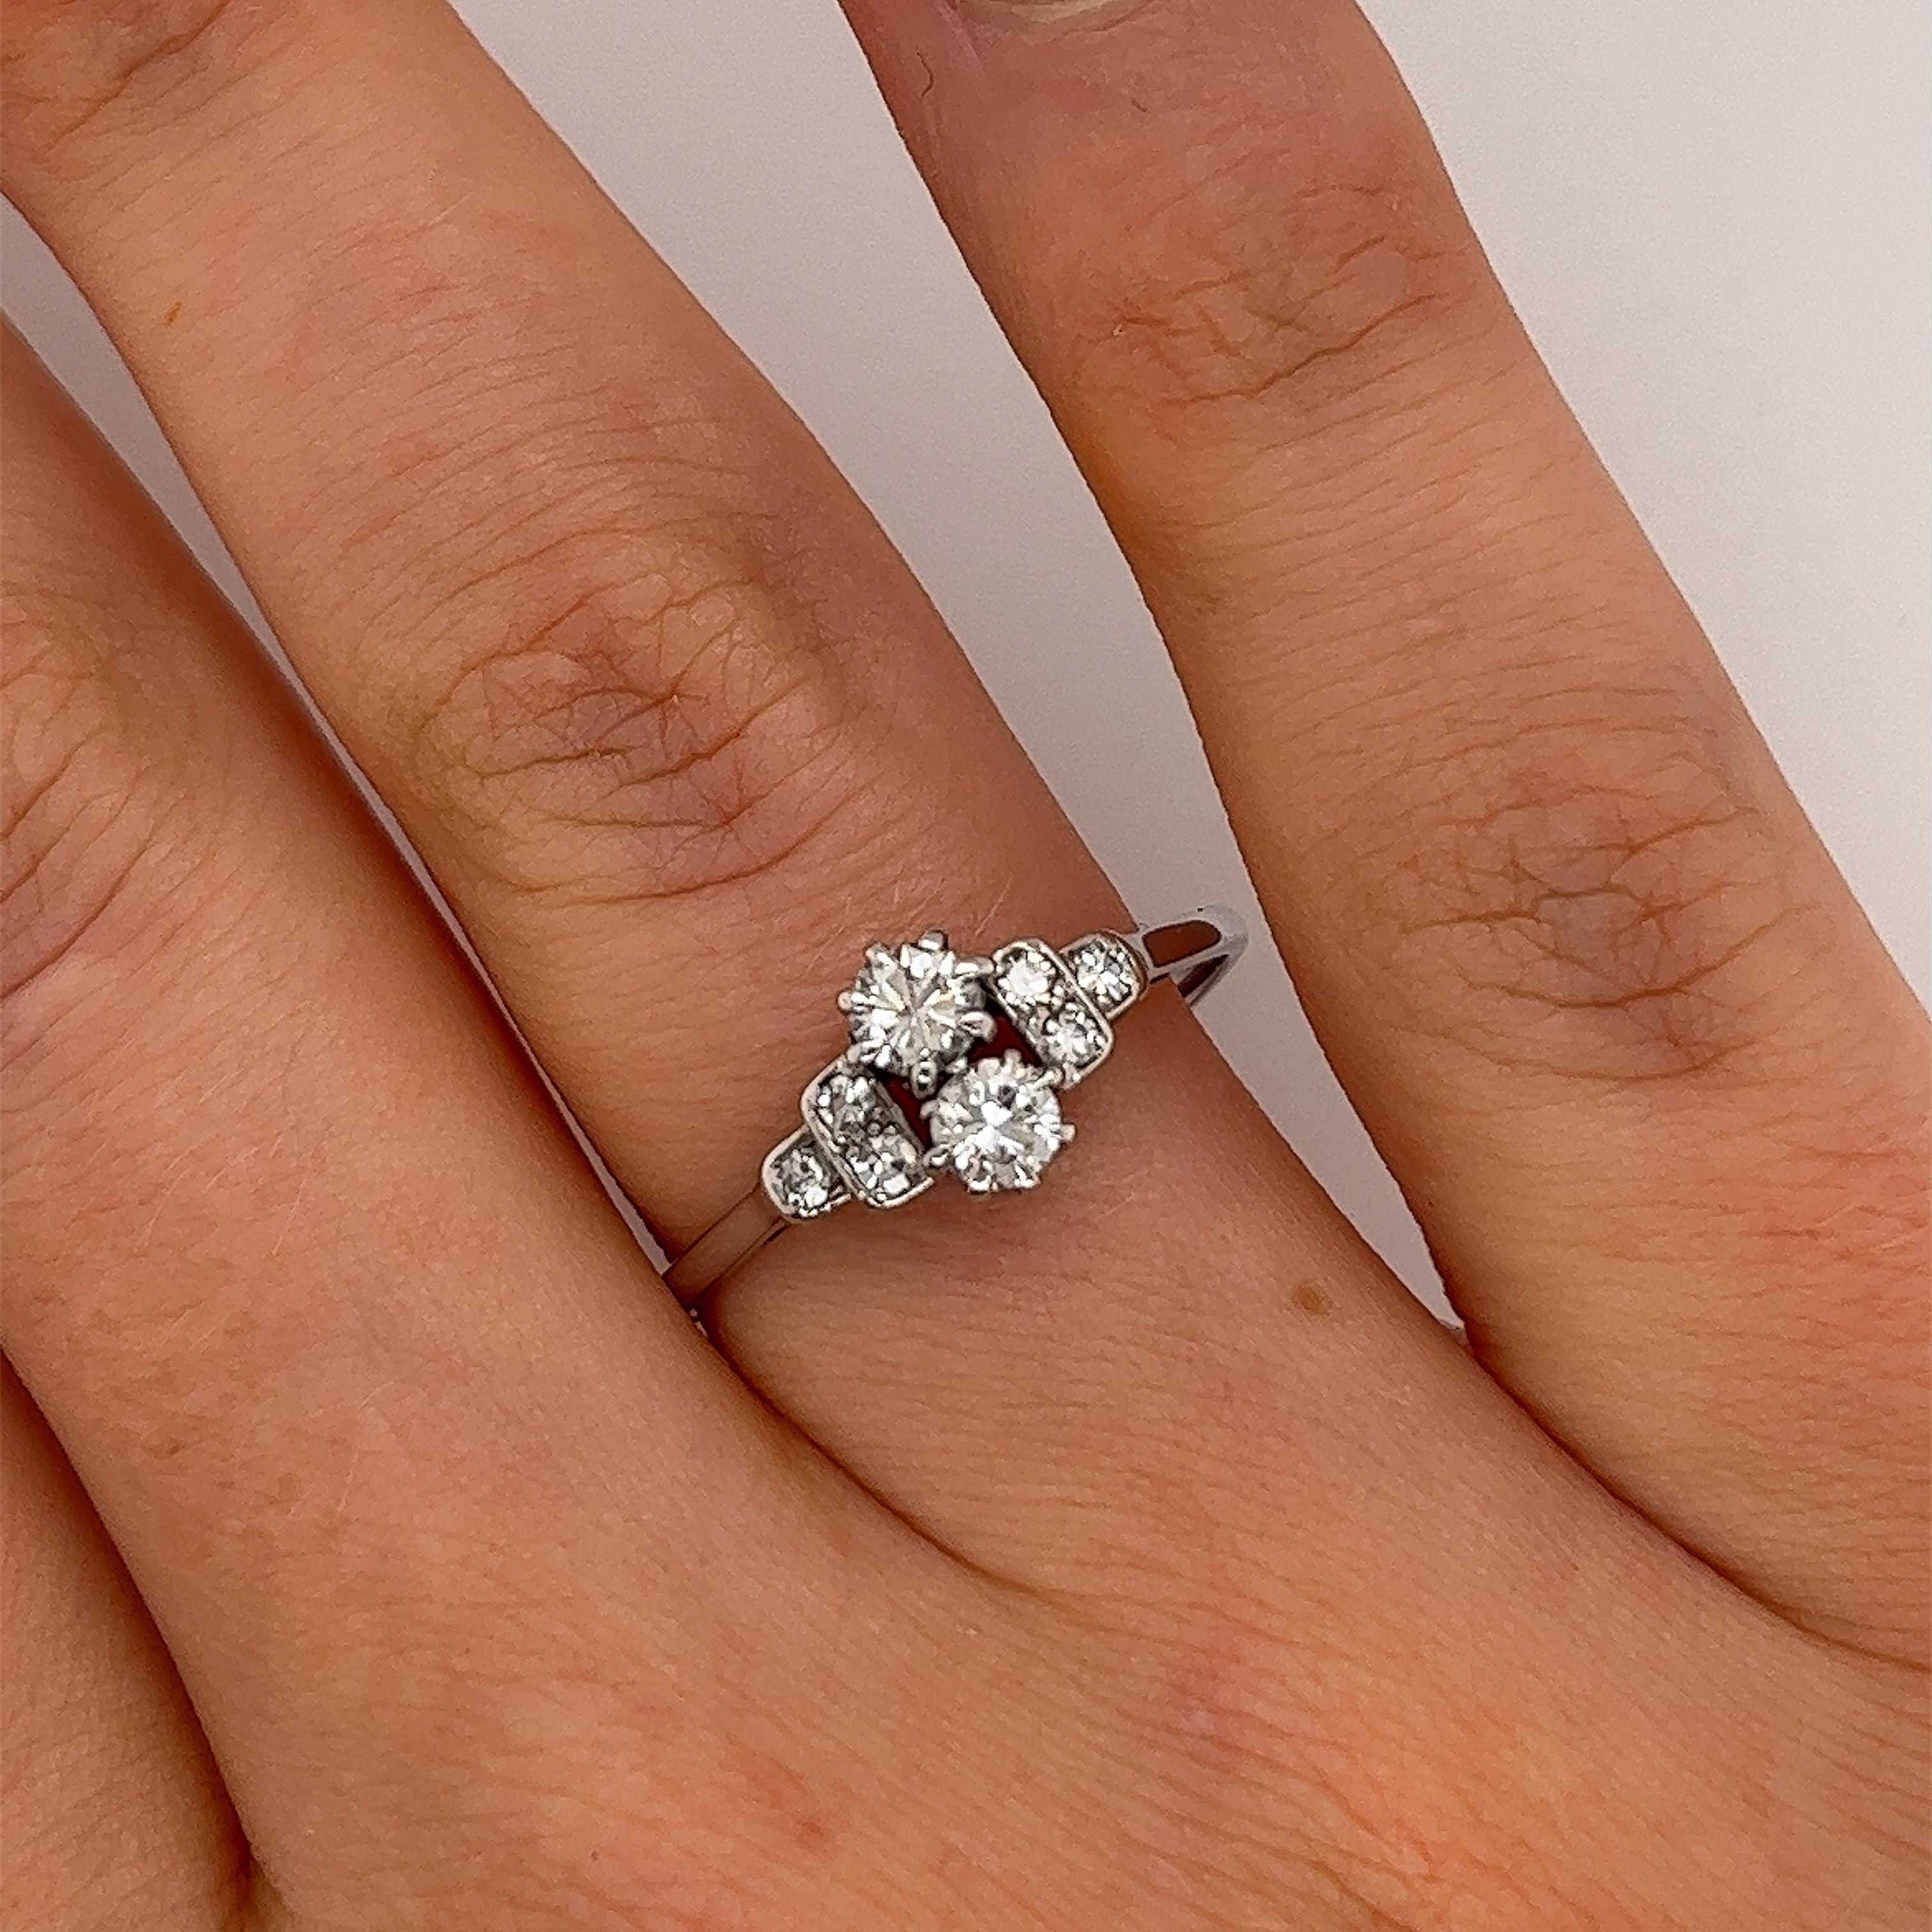 Elegance and sophistication, this preloved 18ct white gold diamond ring set with 2 brilliant cut vertically set central diamonds each of 0.20ct each, franked each side by 3 small diamonds.

Total Diamond Weight: 0.50ct
Diamond Colour: G/H
Diamond